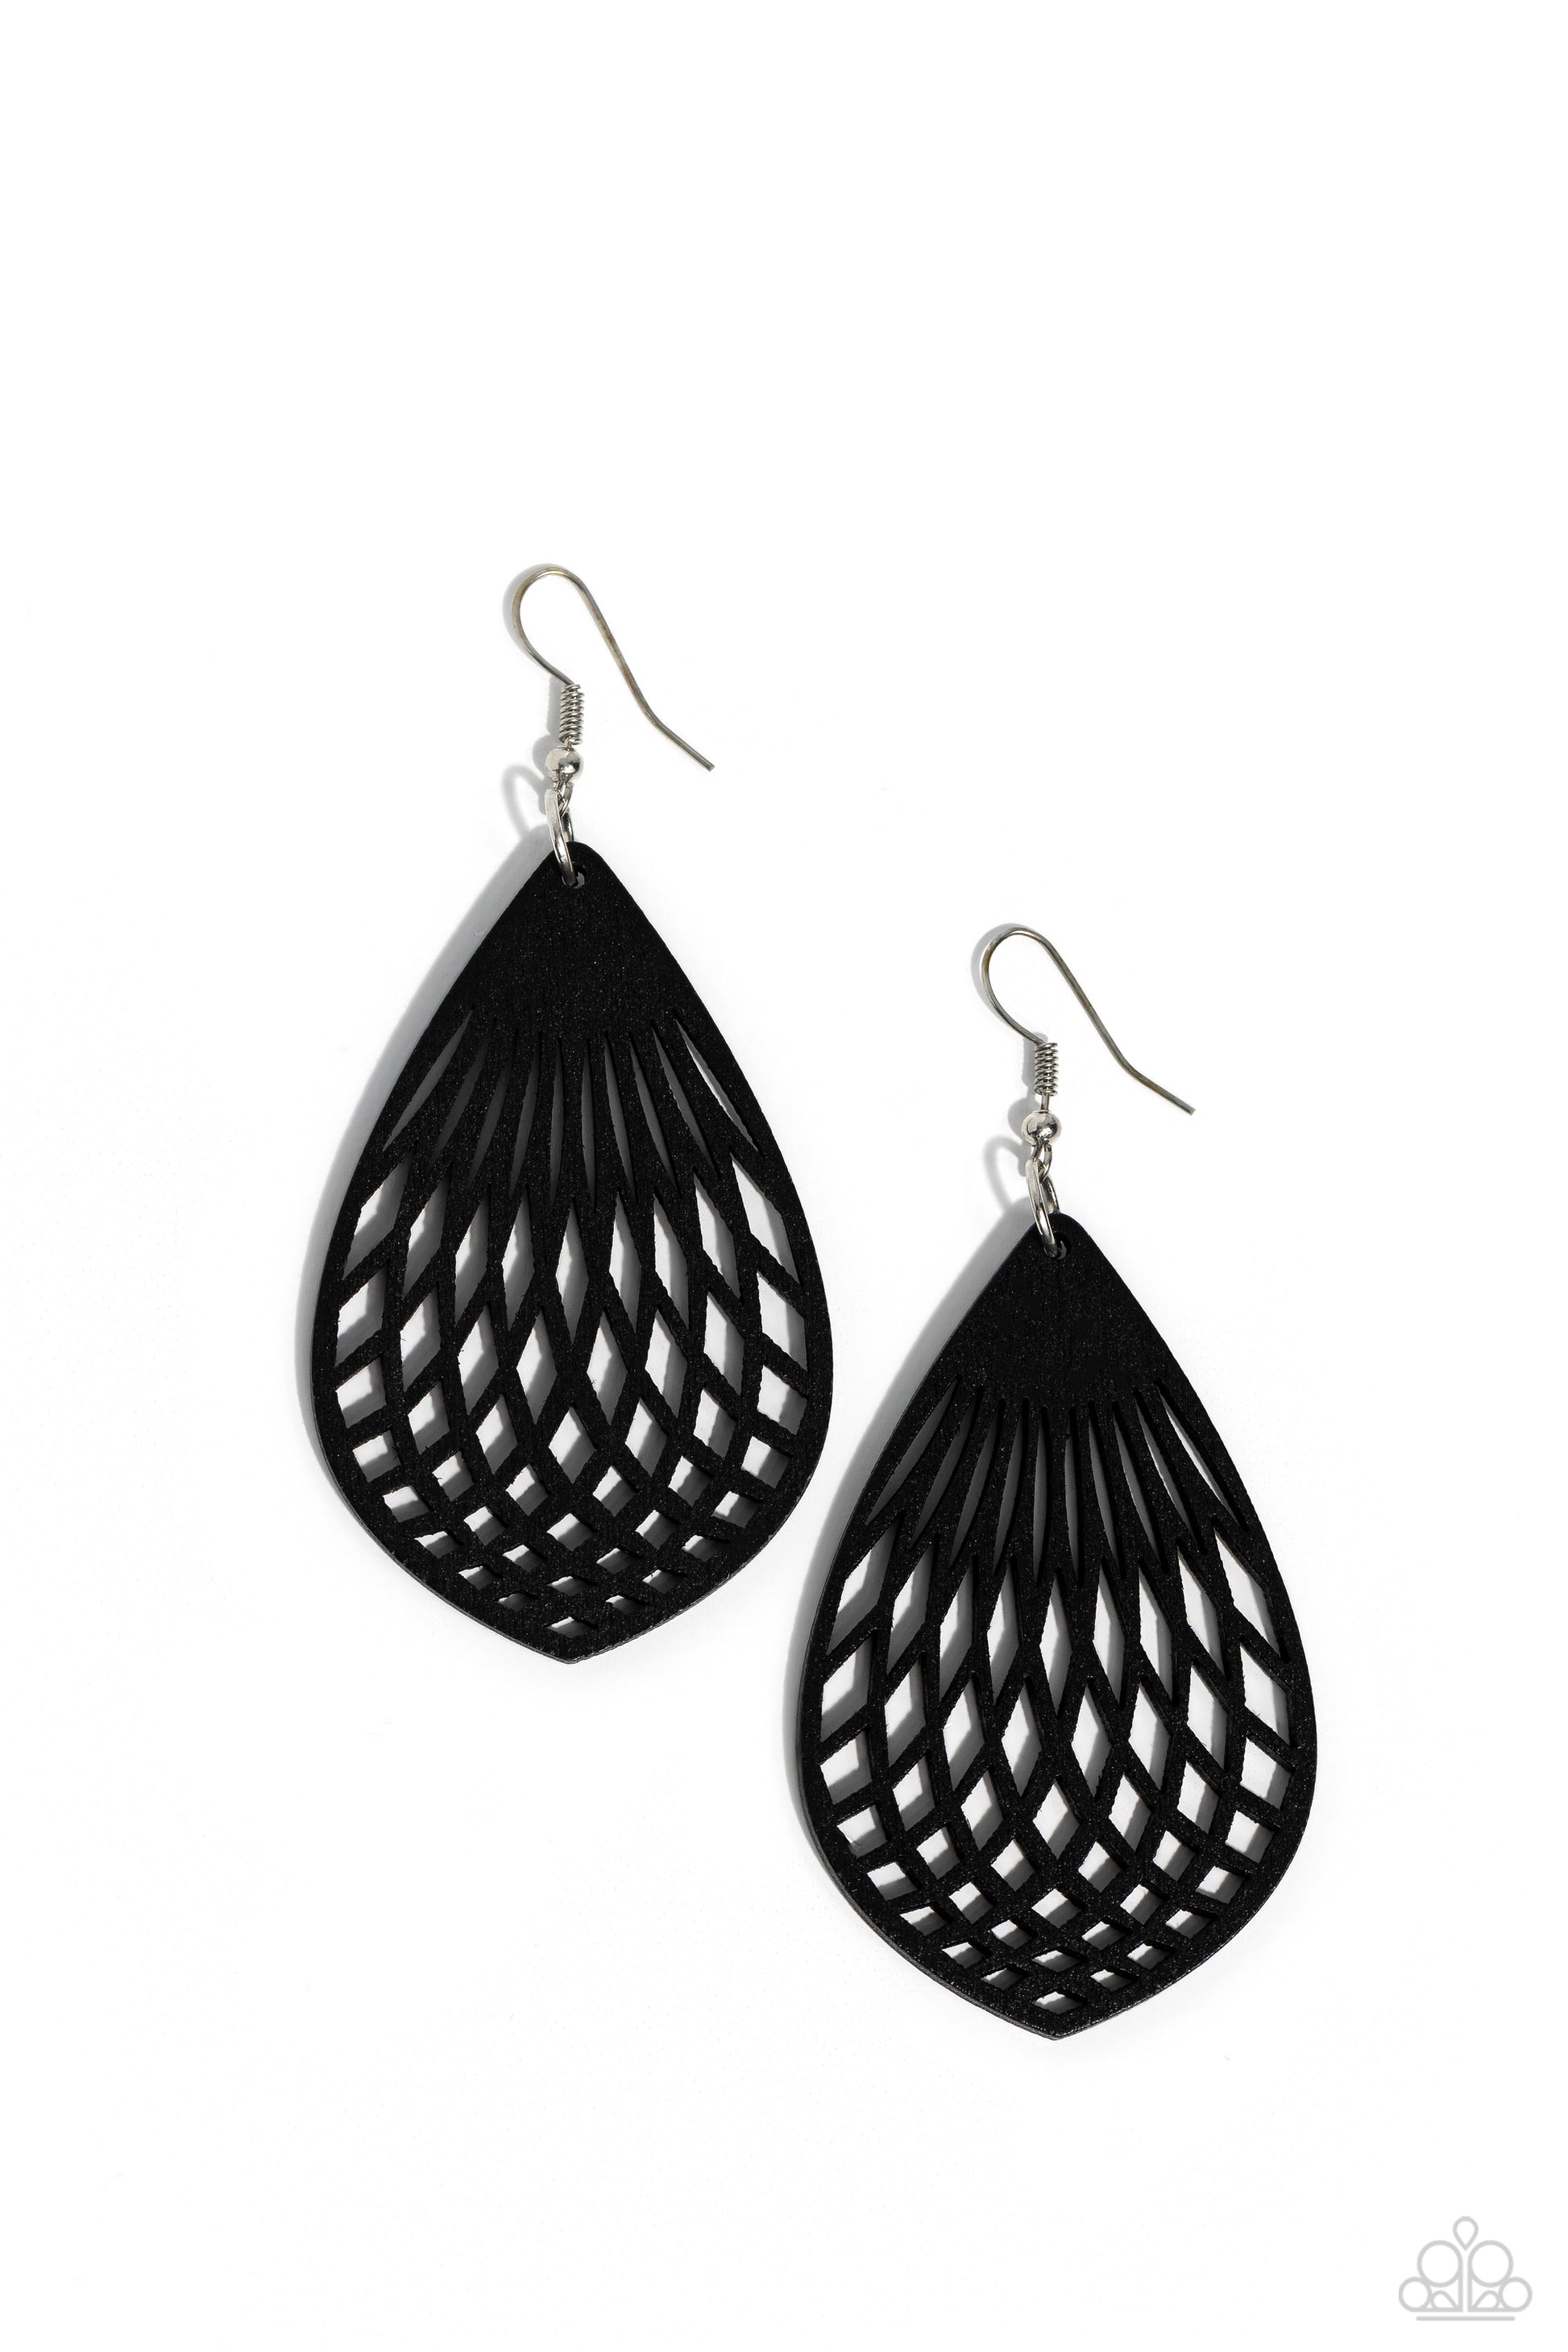 Caribbean Coral Black Wooden Earring - Paparazzi Accessories  Painted in a shiny black finish, an airy teardrop wooden frame features a geometric cut-out design resulting in a whimsically modern lure. Earring attaches to a standard fishhook fitting.  Sold as one pair of earrings.  P5SE-BKXX-268XX